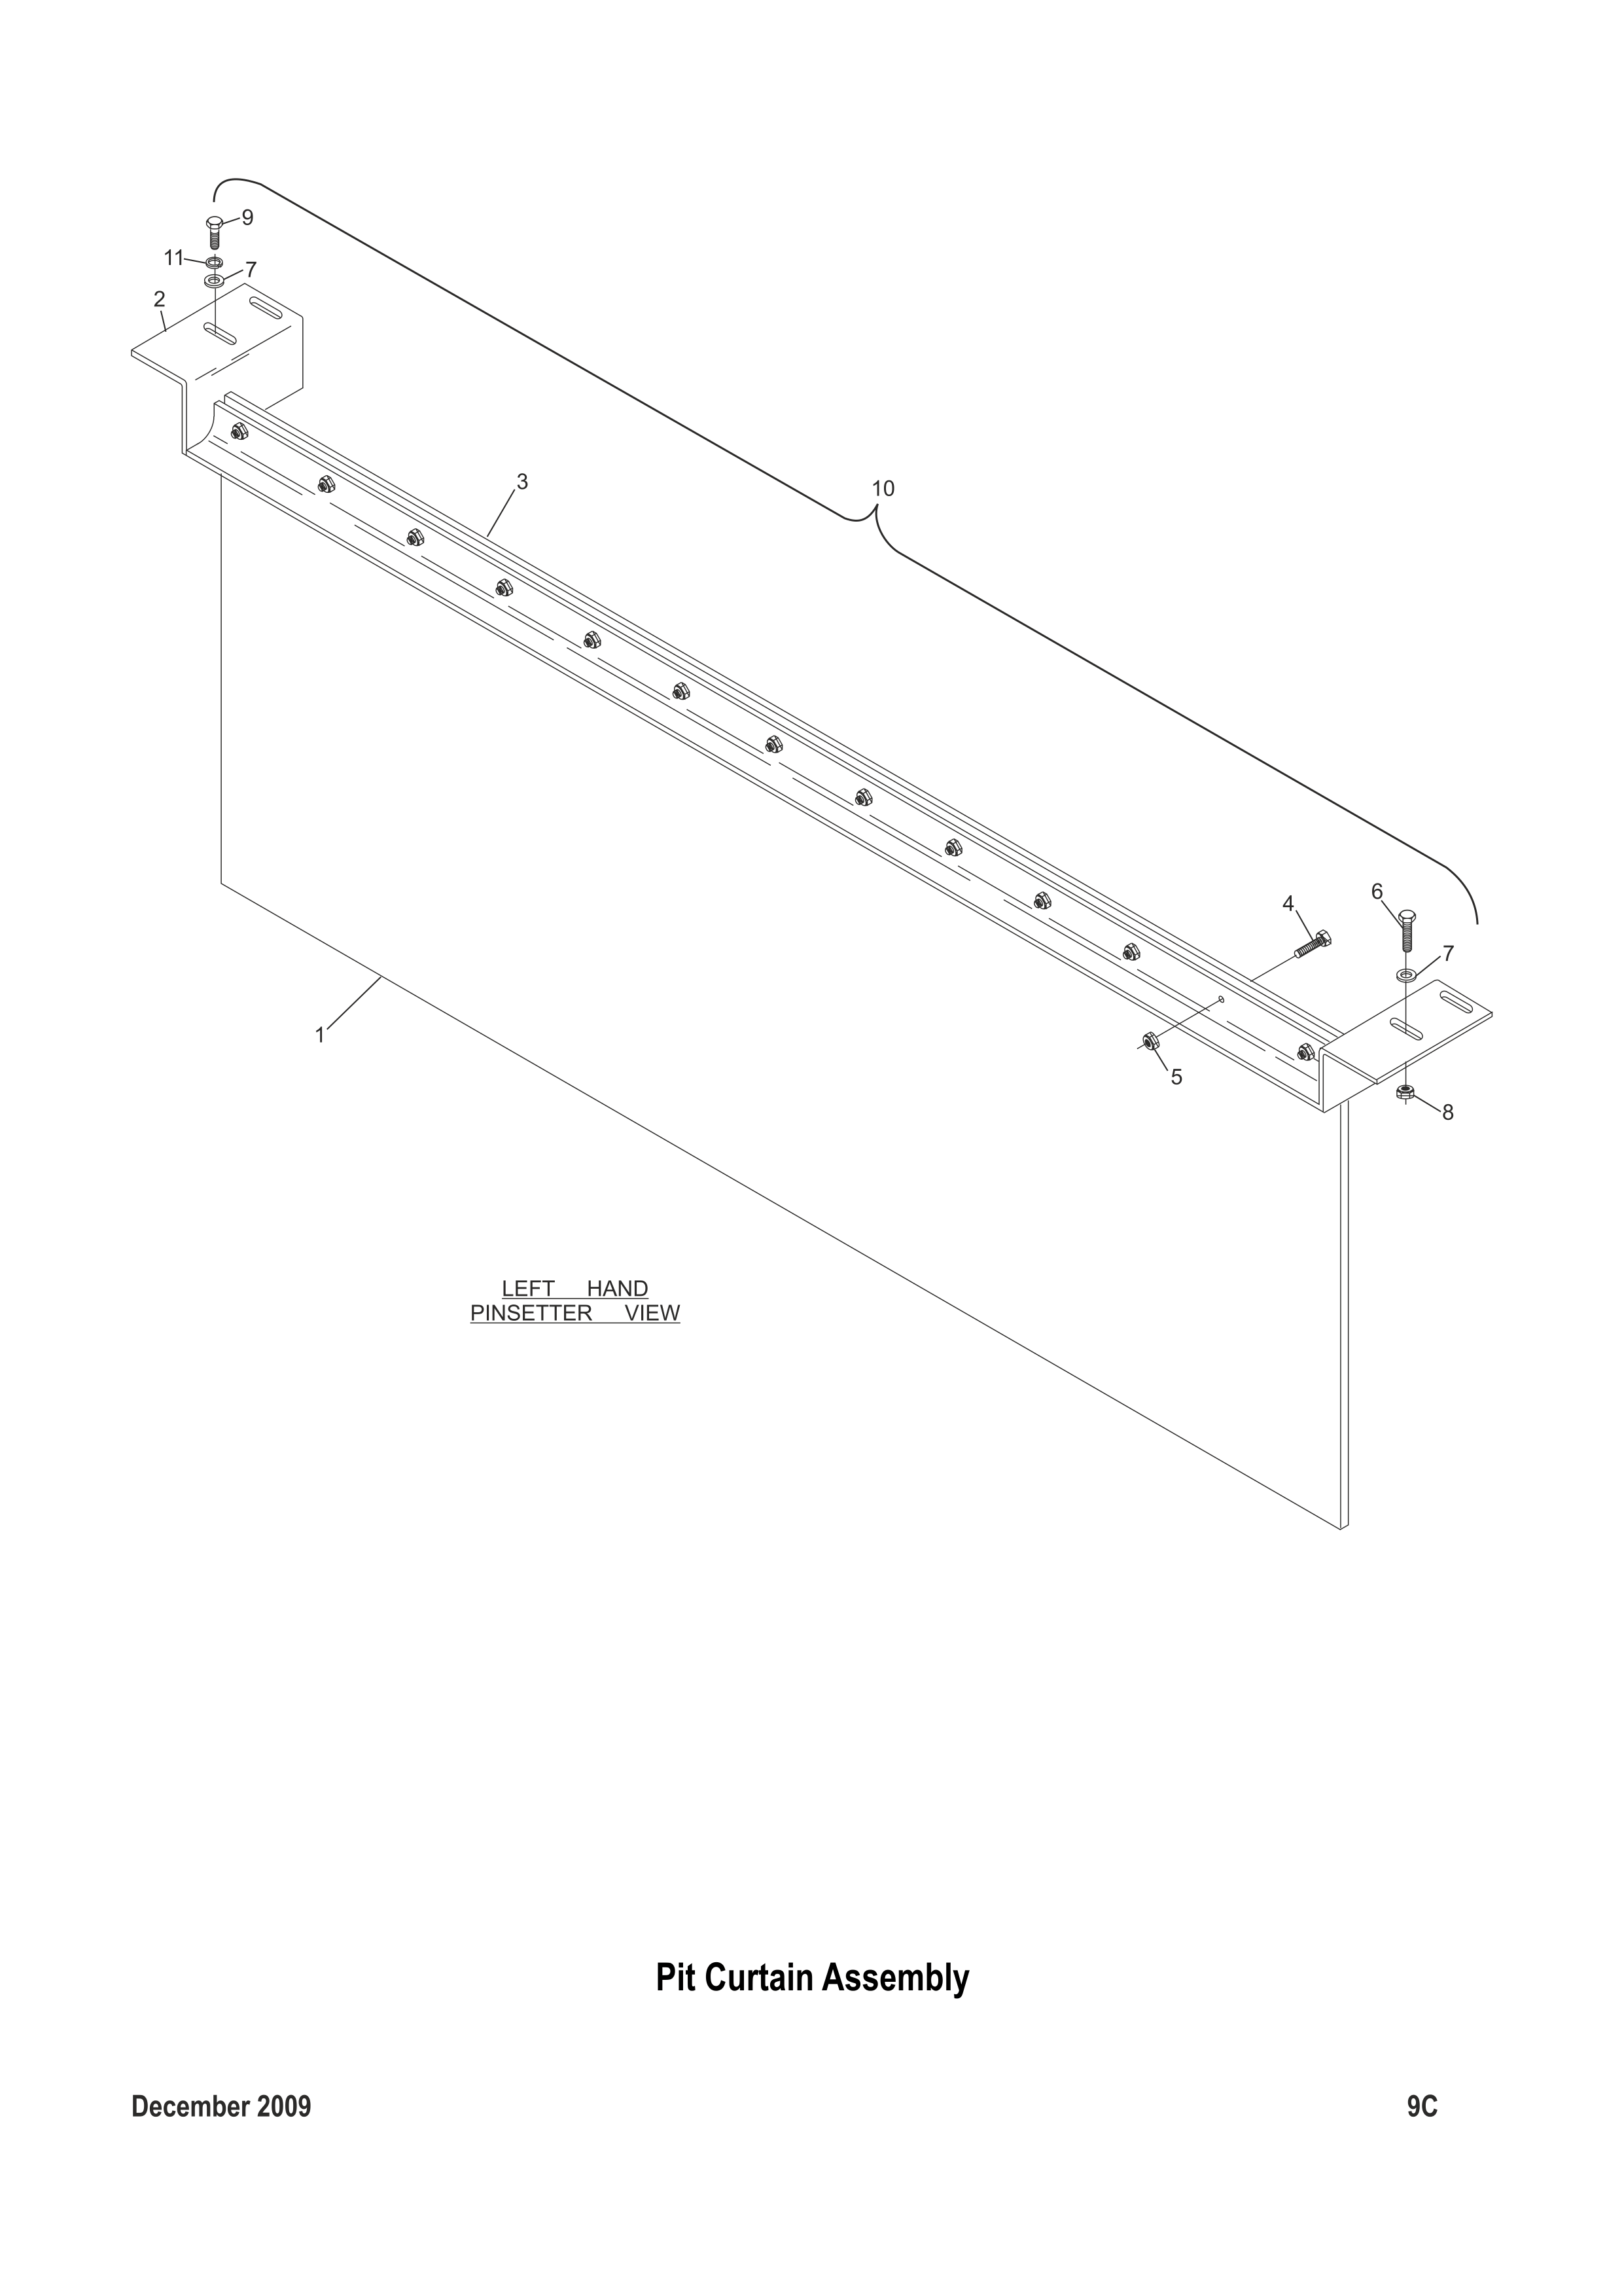 Pit_Curtain_Assembly